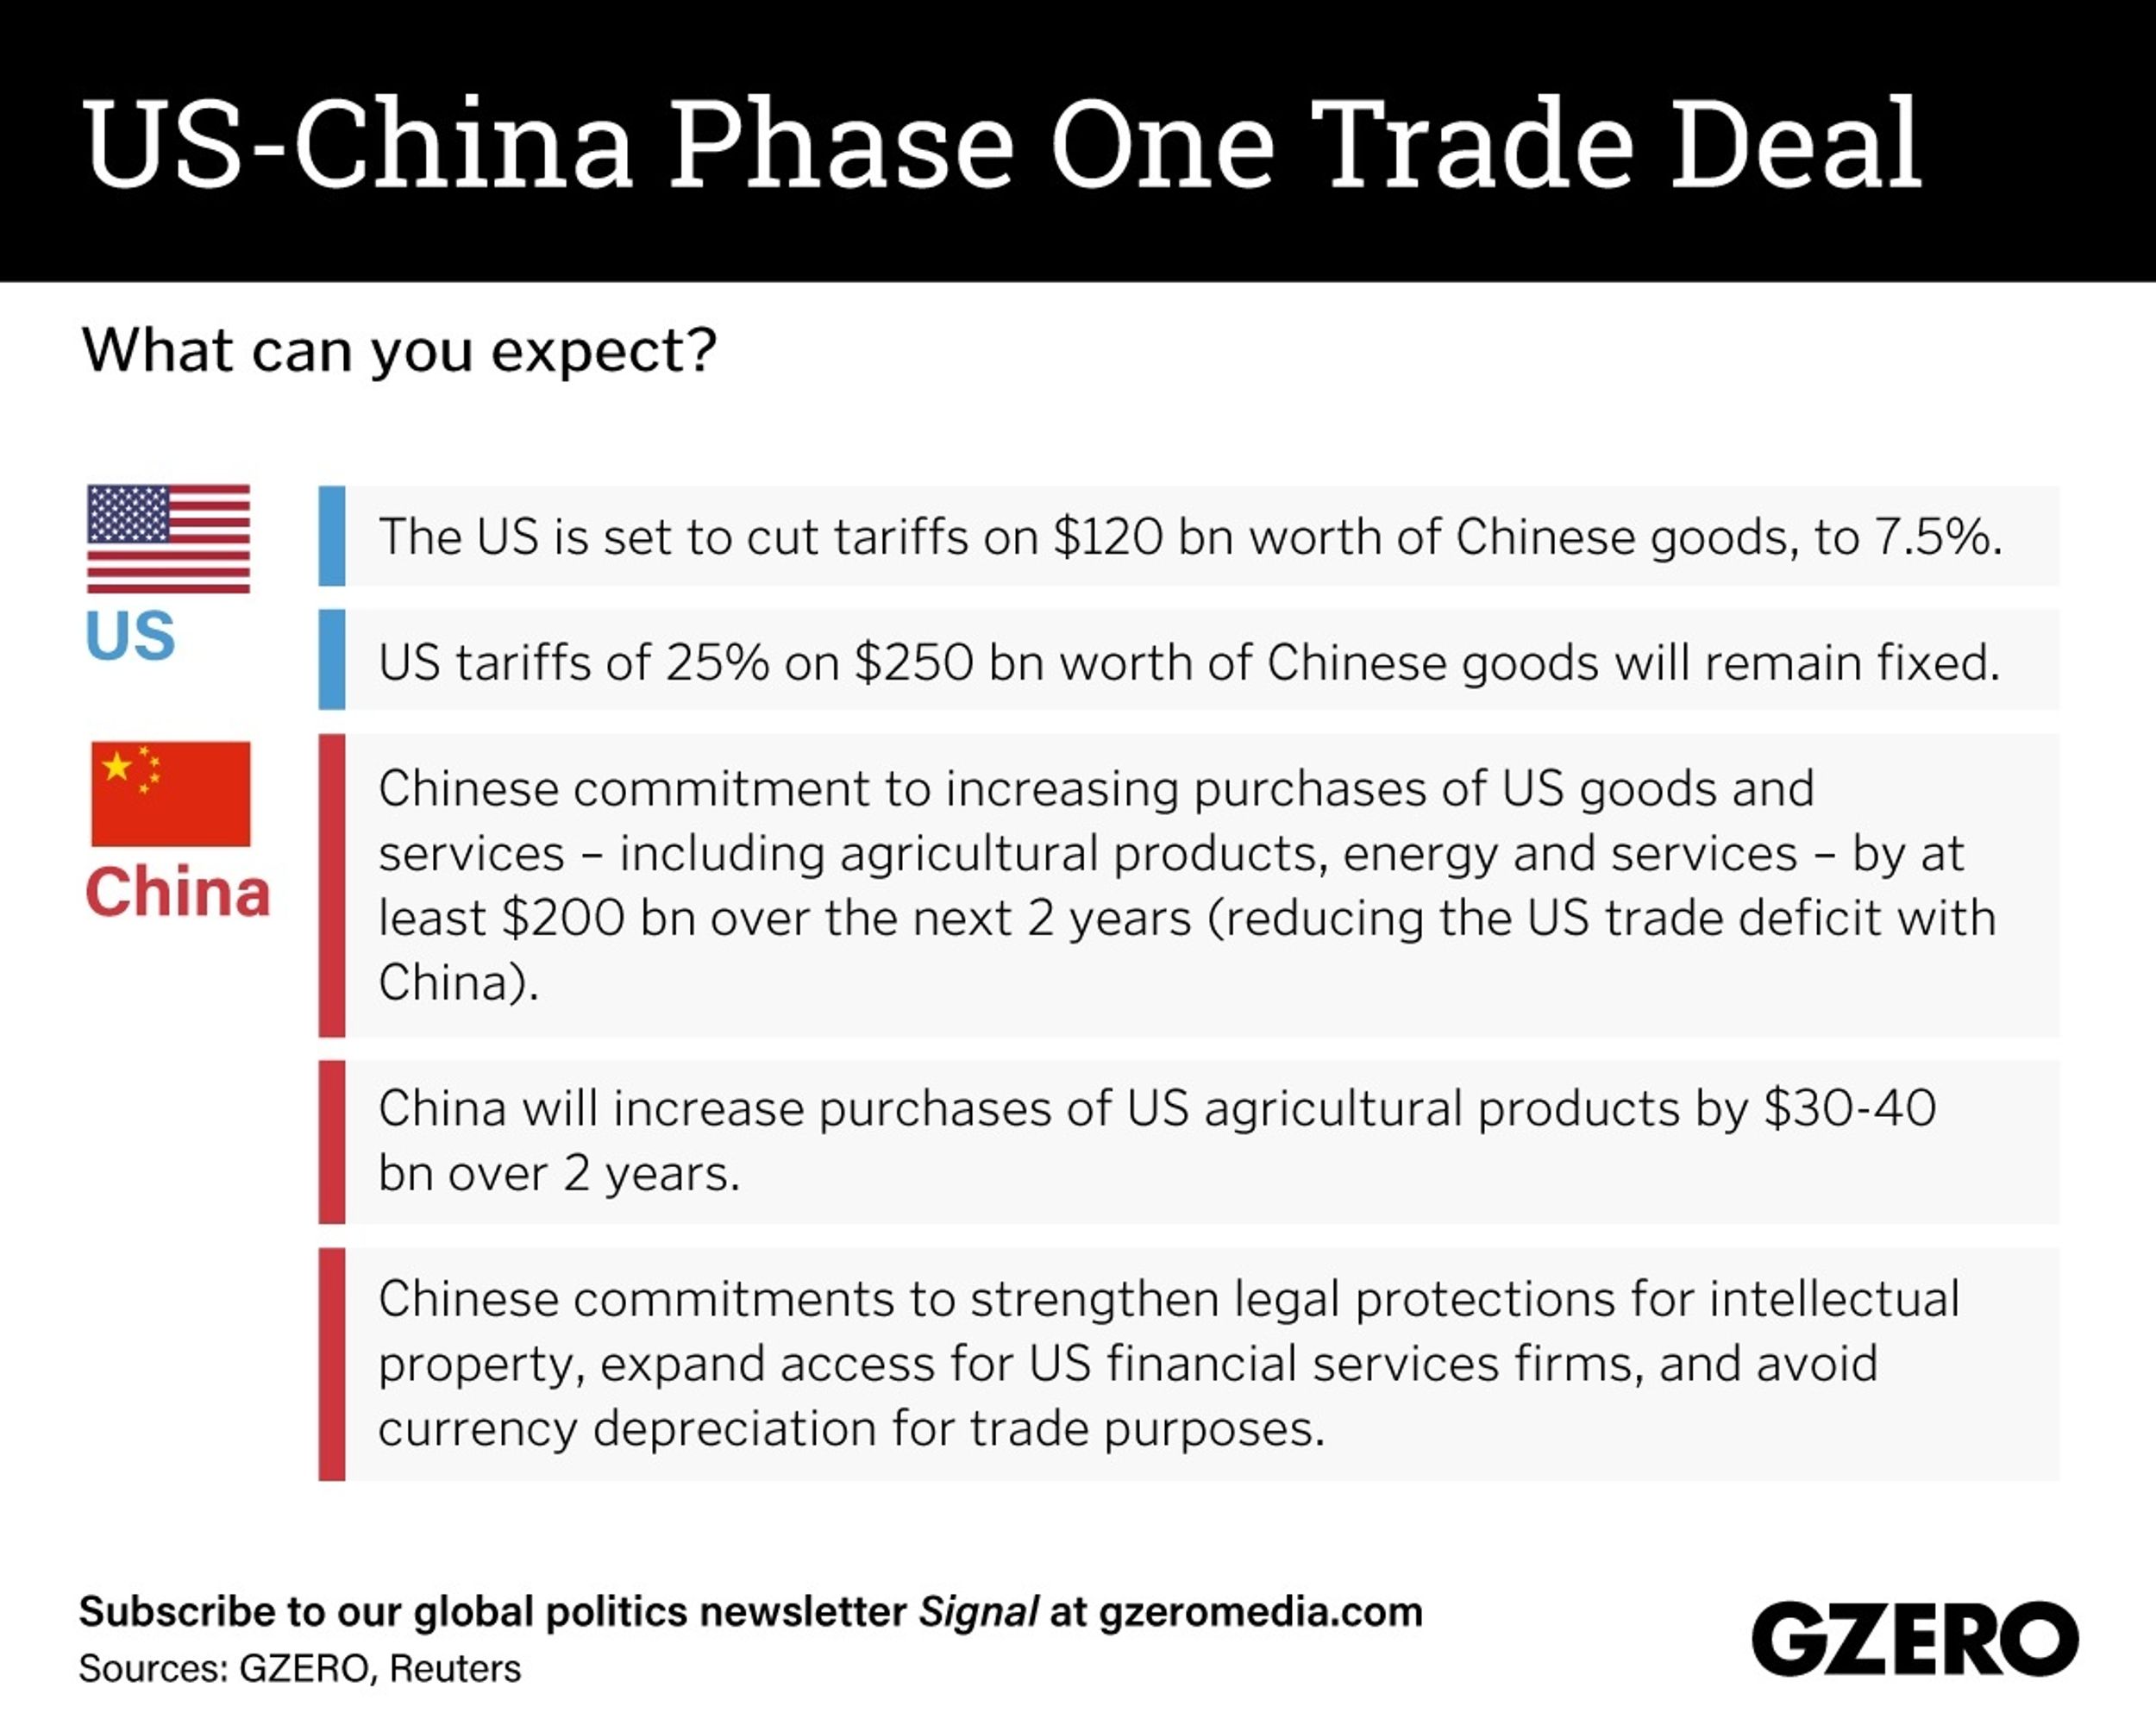 The Graphic Truth: US-China phase one trade deal